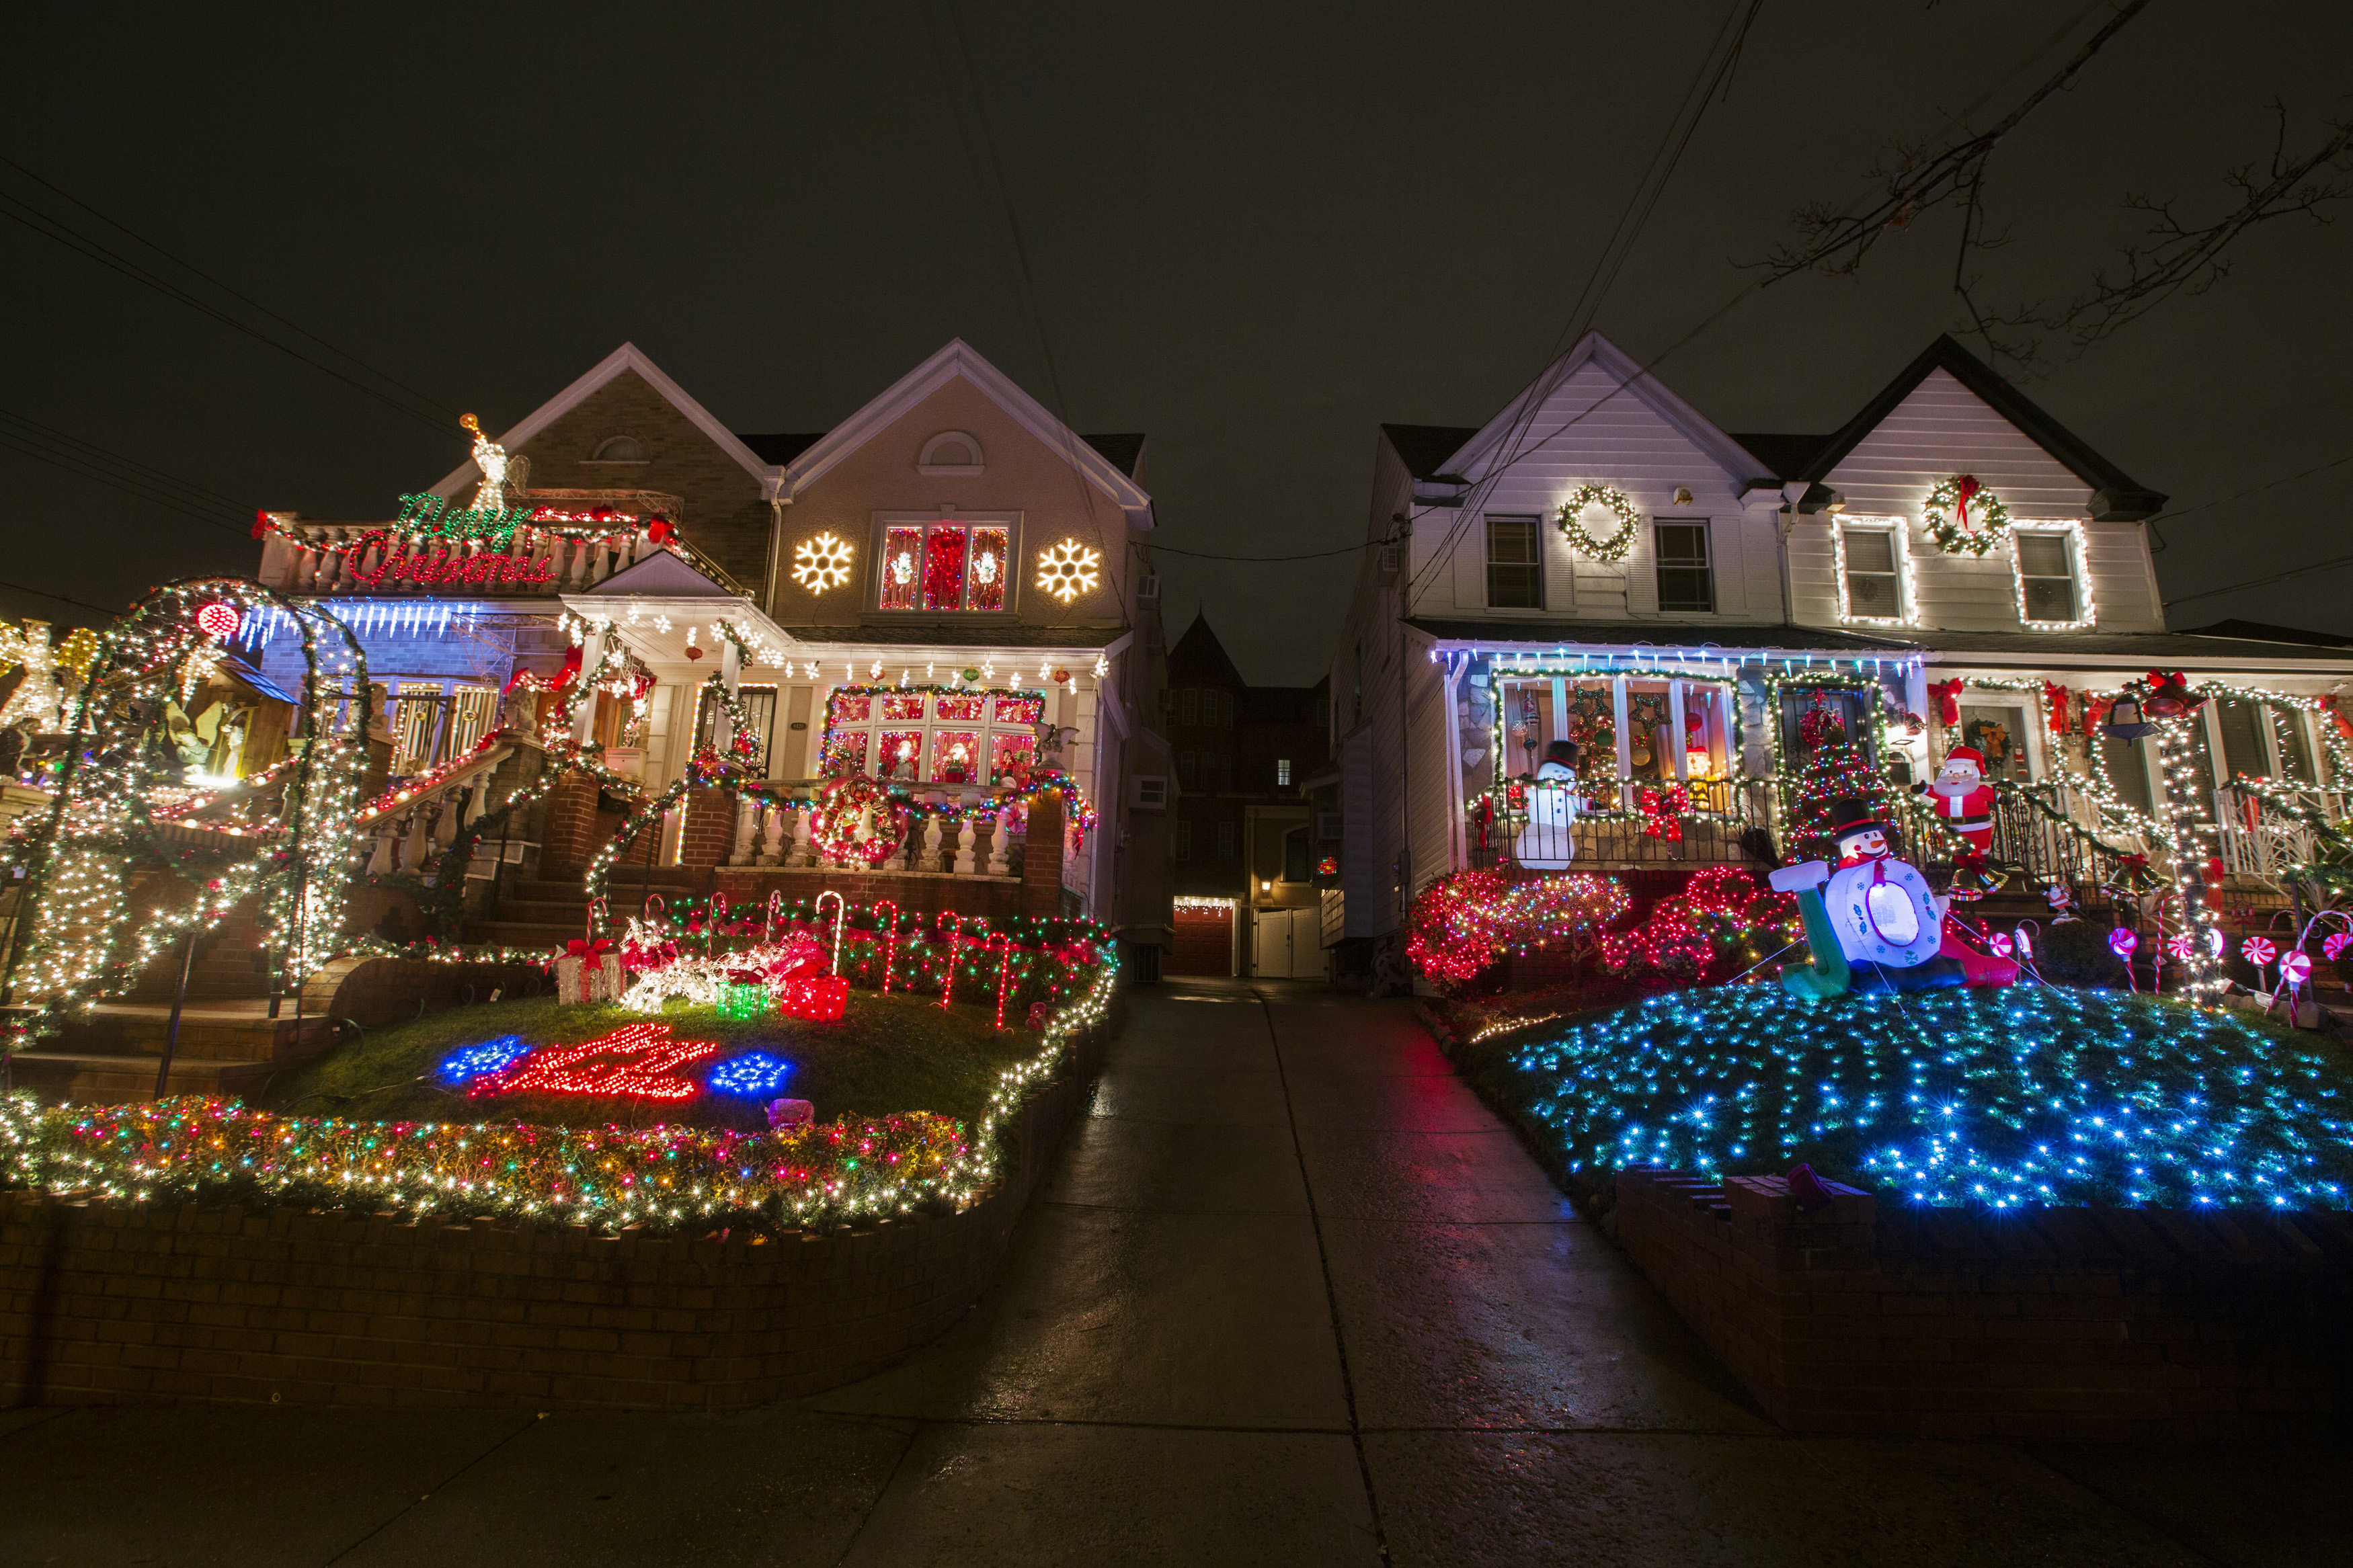 Houses in the Dyker Heights neighborhood of Brooklyn are seen lit up with Christmas decorations in New York